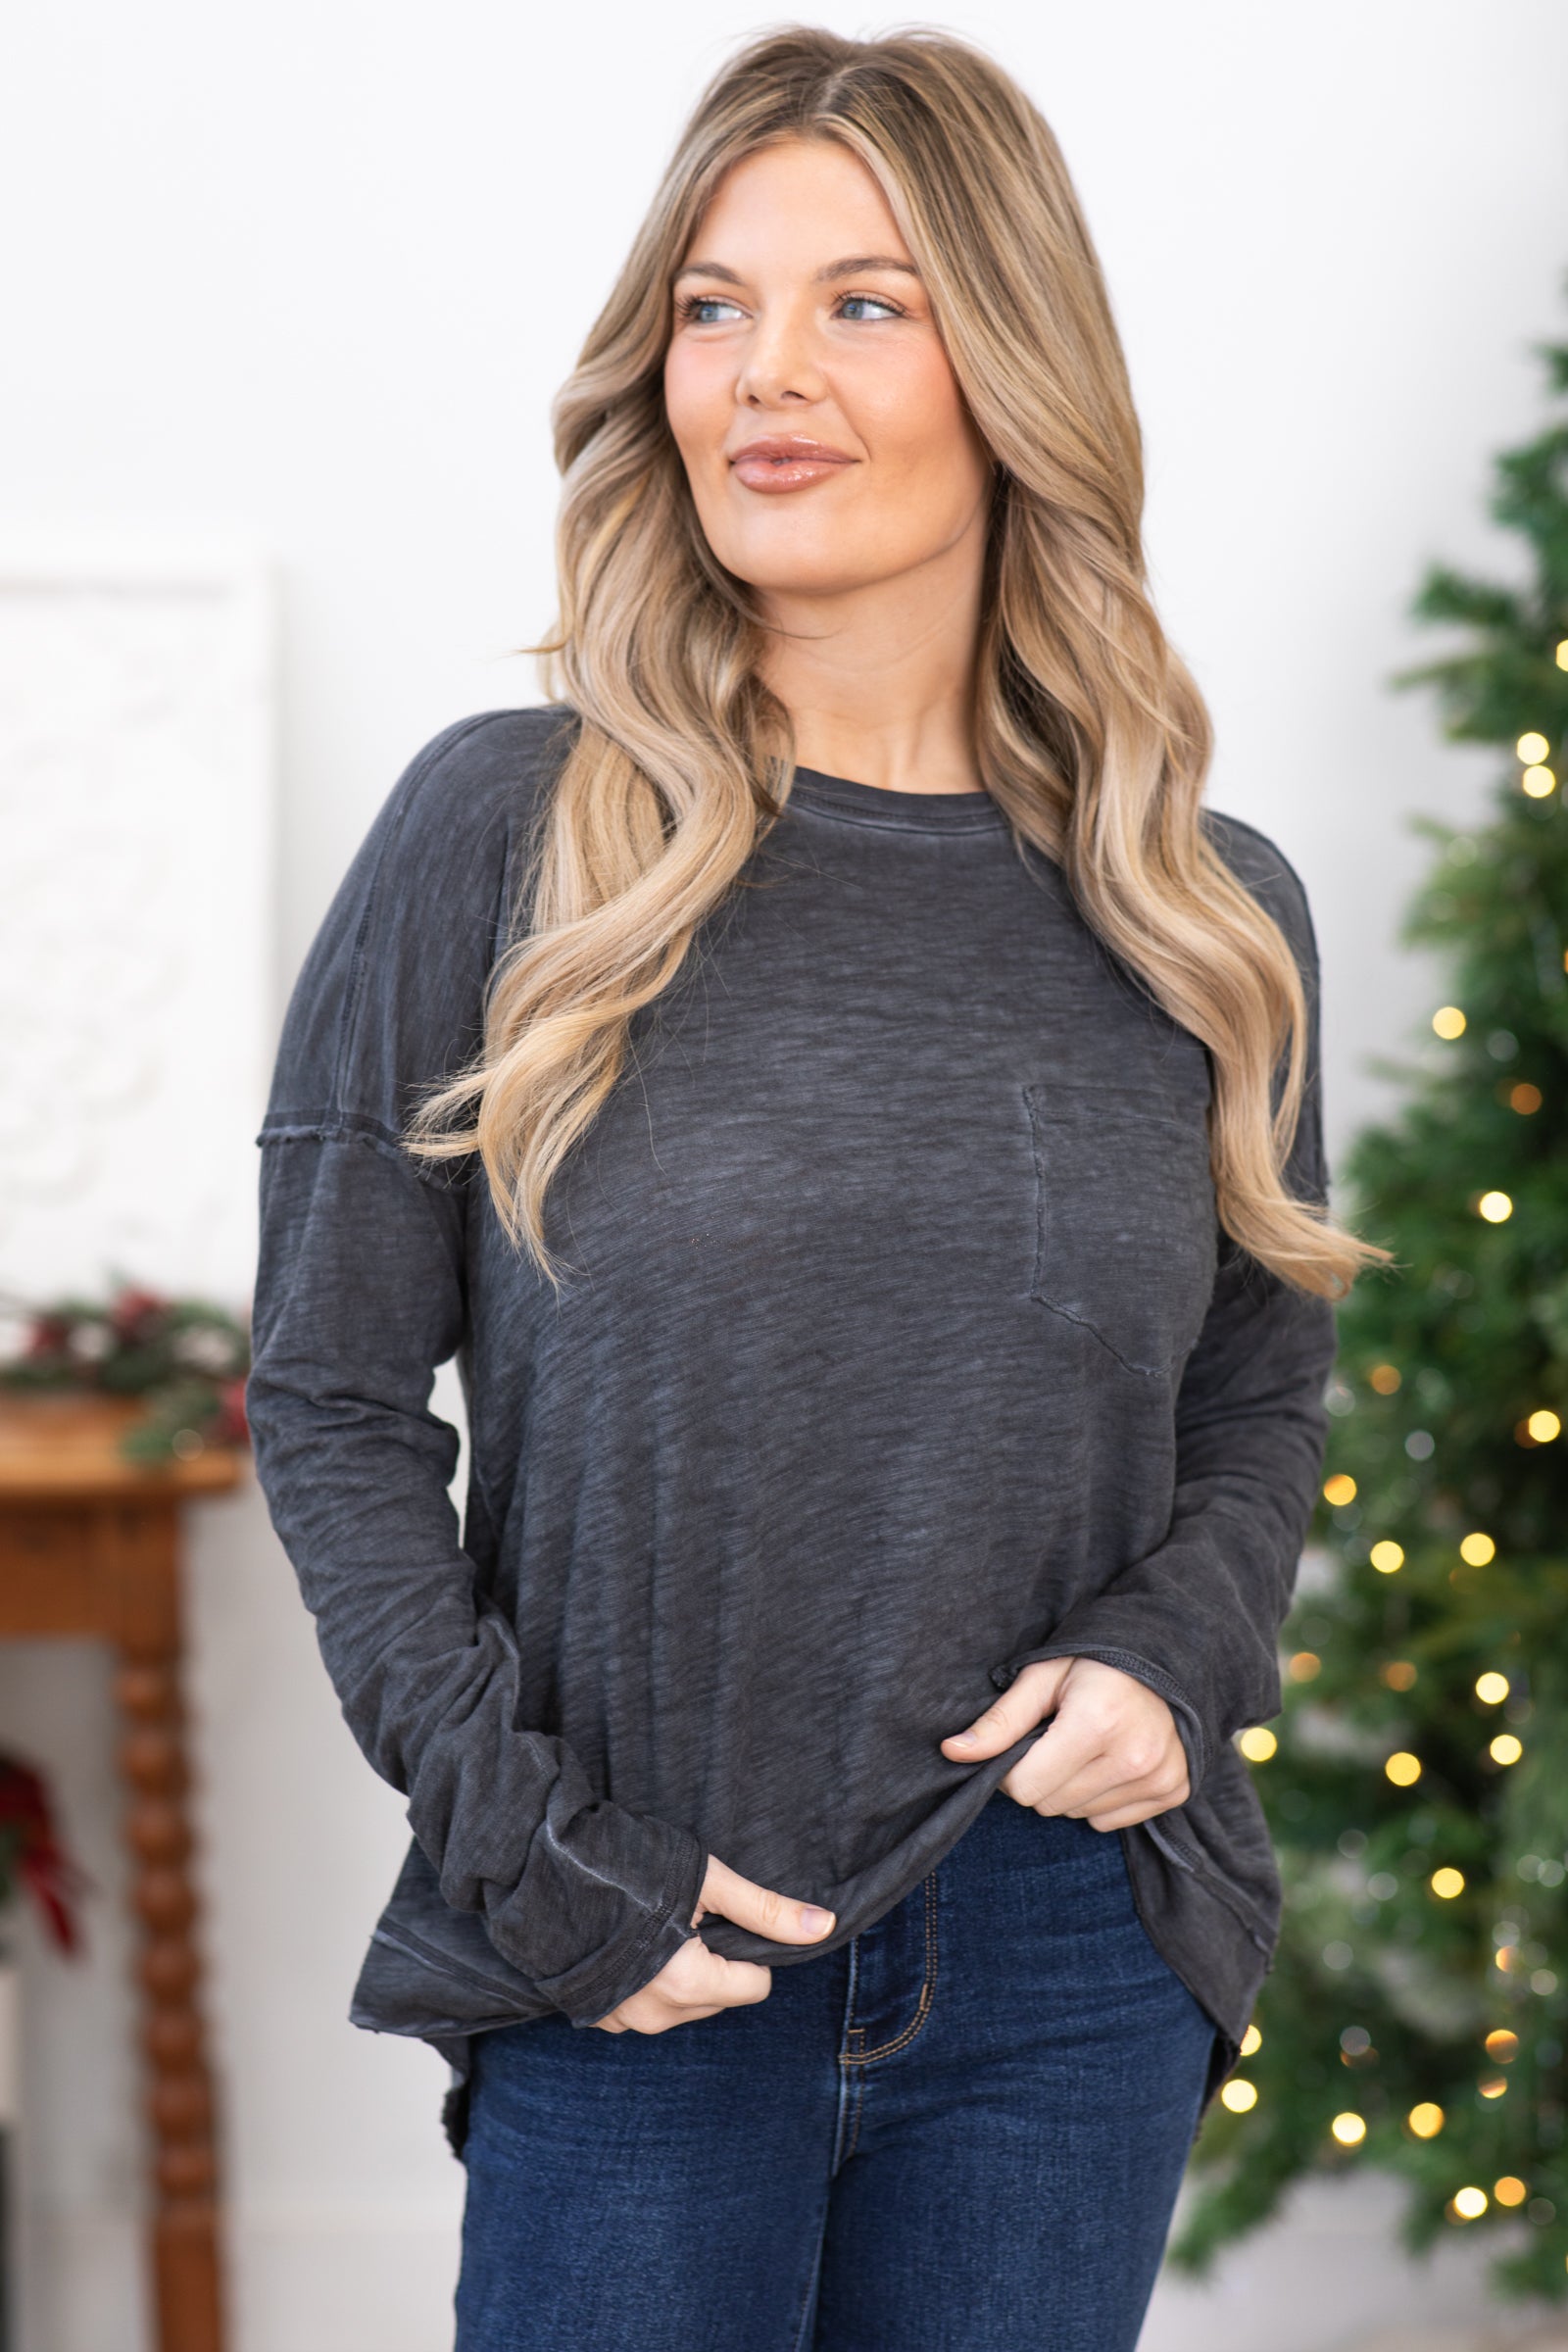 Charcoal Burnout Top With Pocket